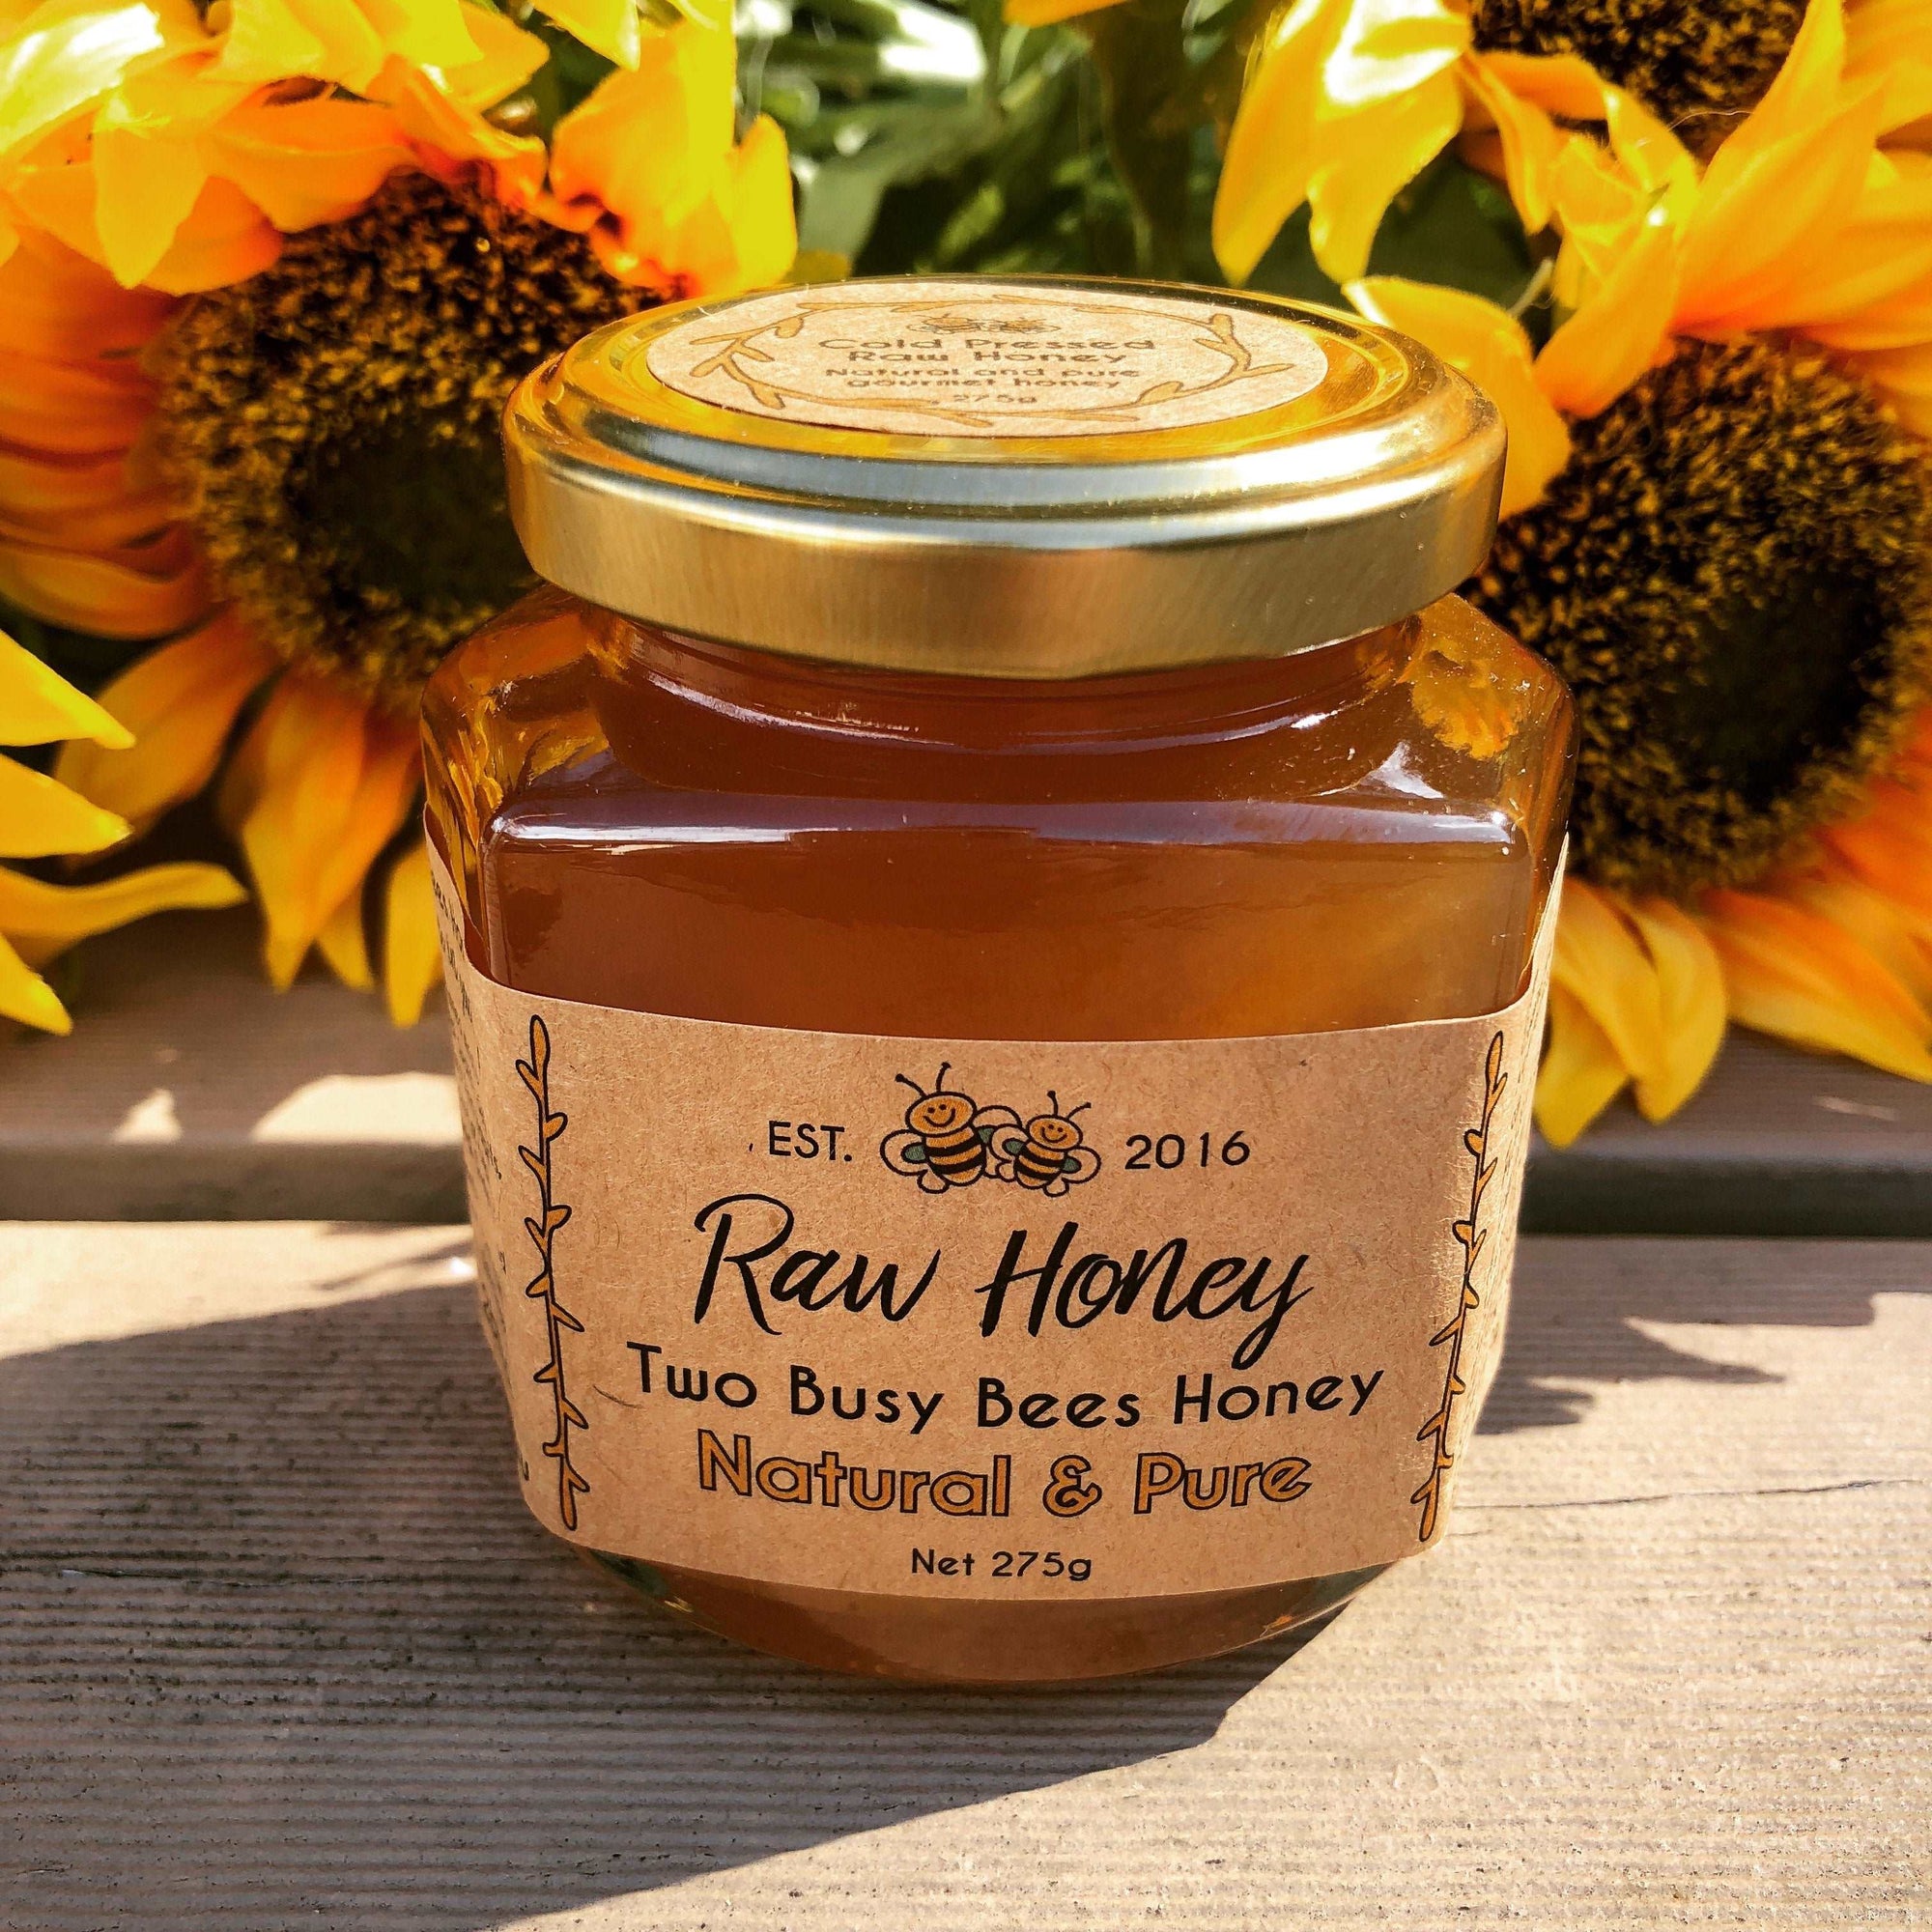 Pure-raw-honey-jar-from-Two-Busy-Bees-Honey